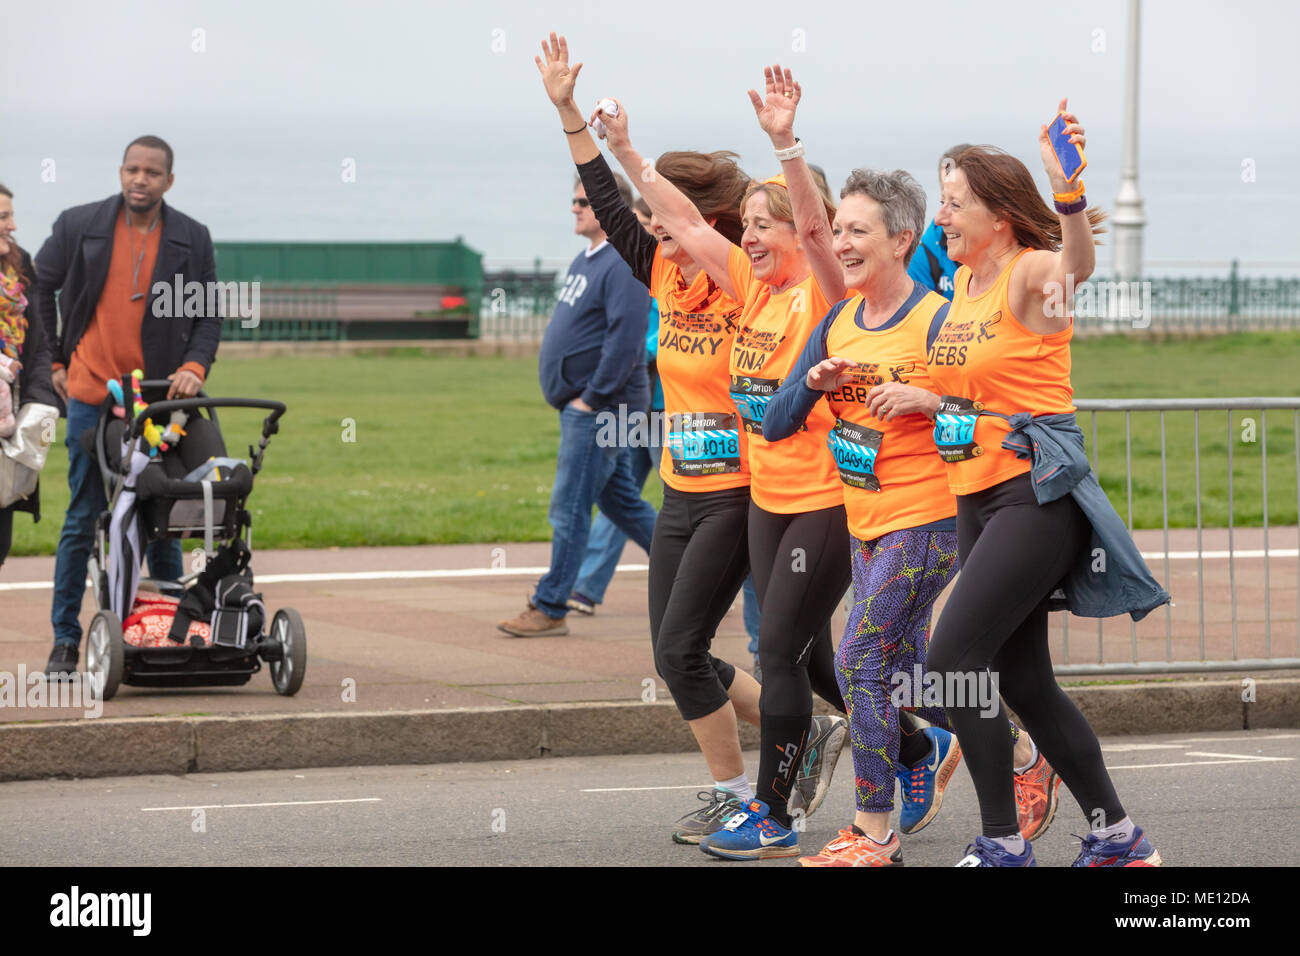 Brighton, Sussex, UK; 15th April 2018; Four Women Wearing Orange Tops Smile and Wave While Participating in Brighton 10K Race Stock Photo